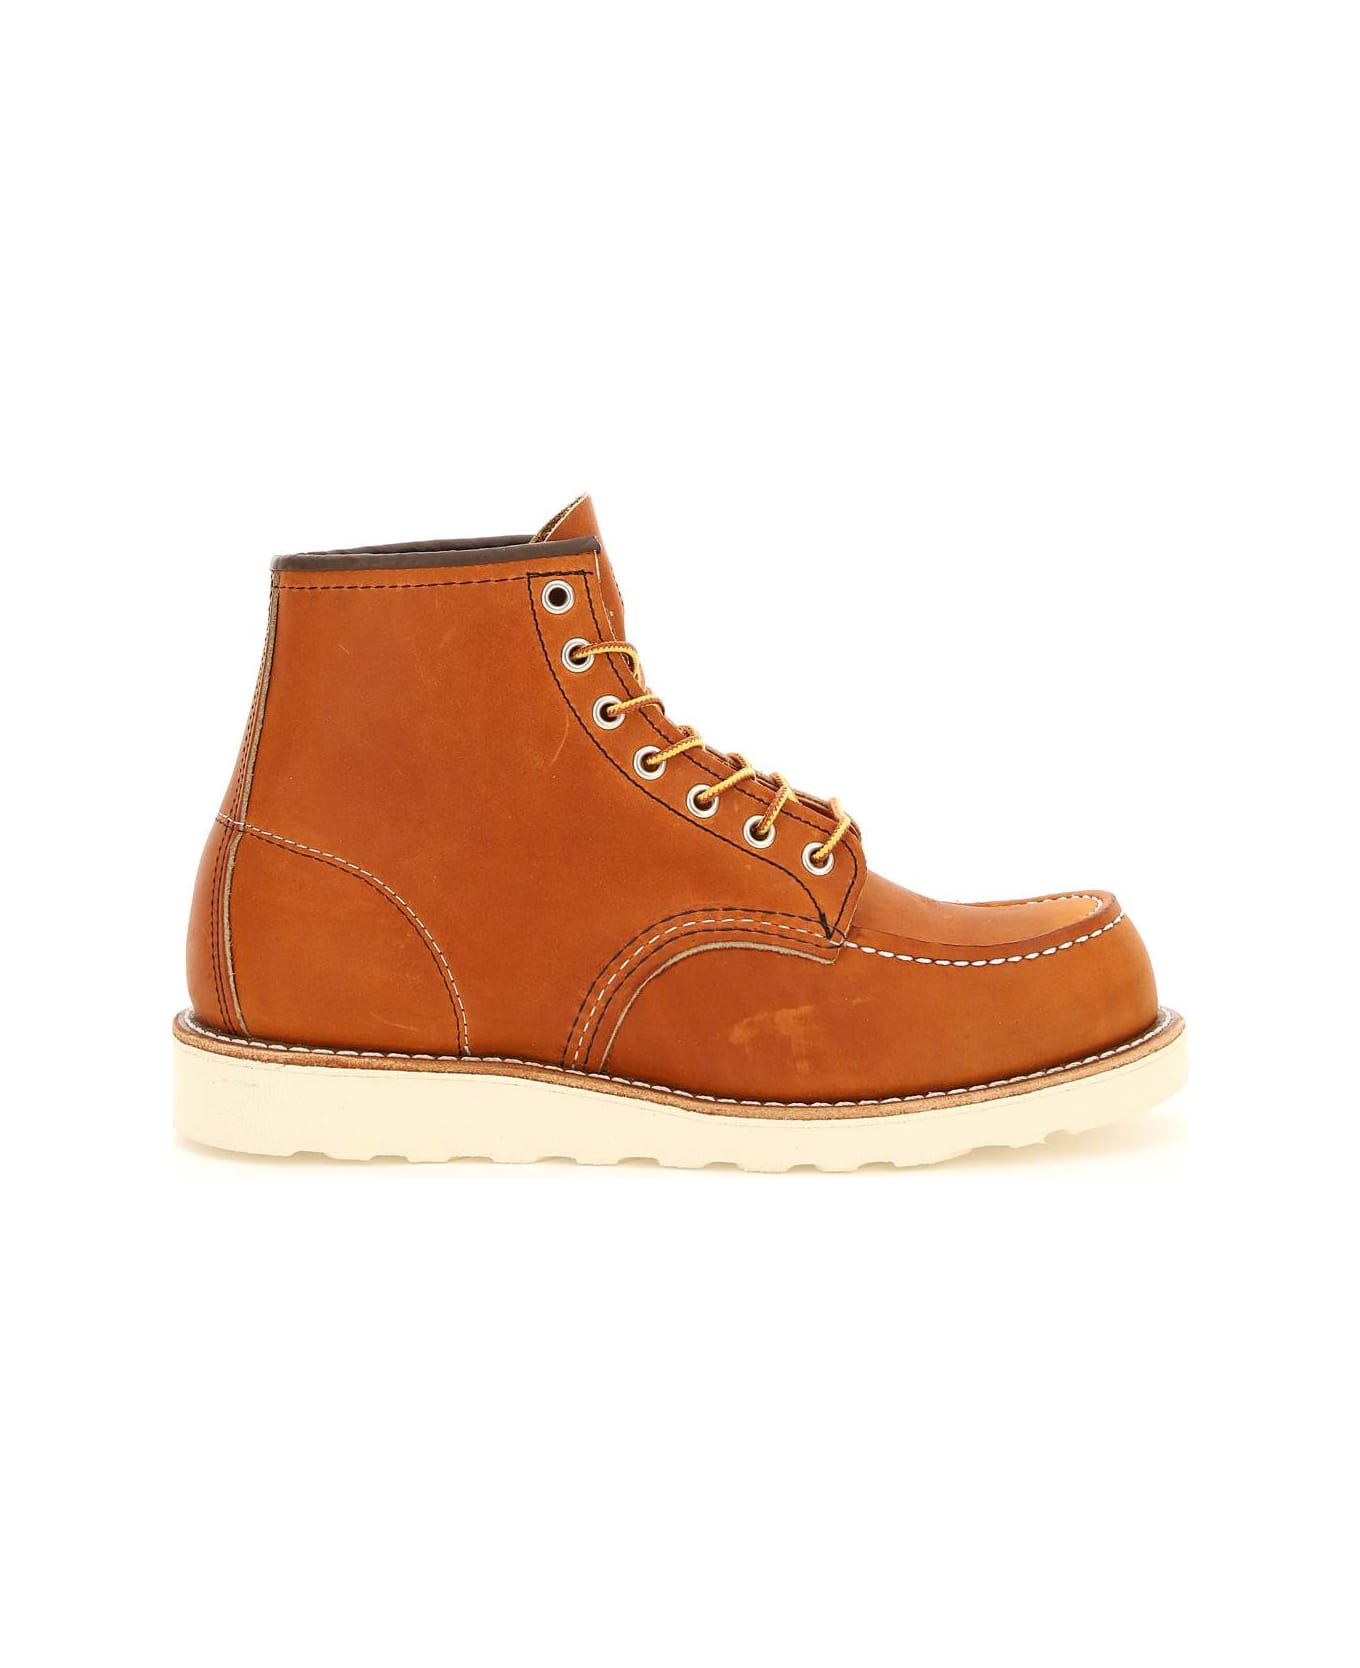 Red Wing Classic Moc Ankle Boots - ORO LEGACY (Brown)